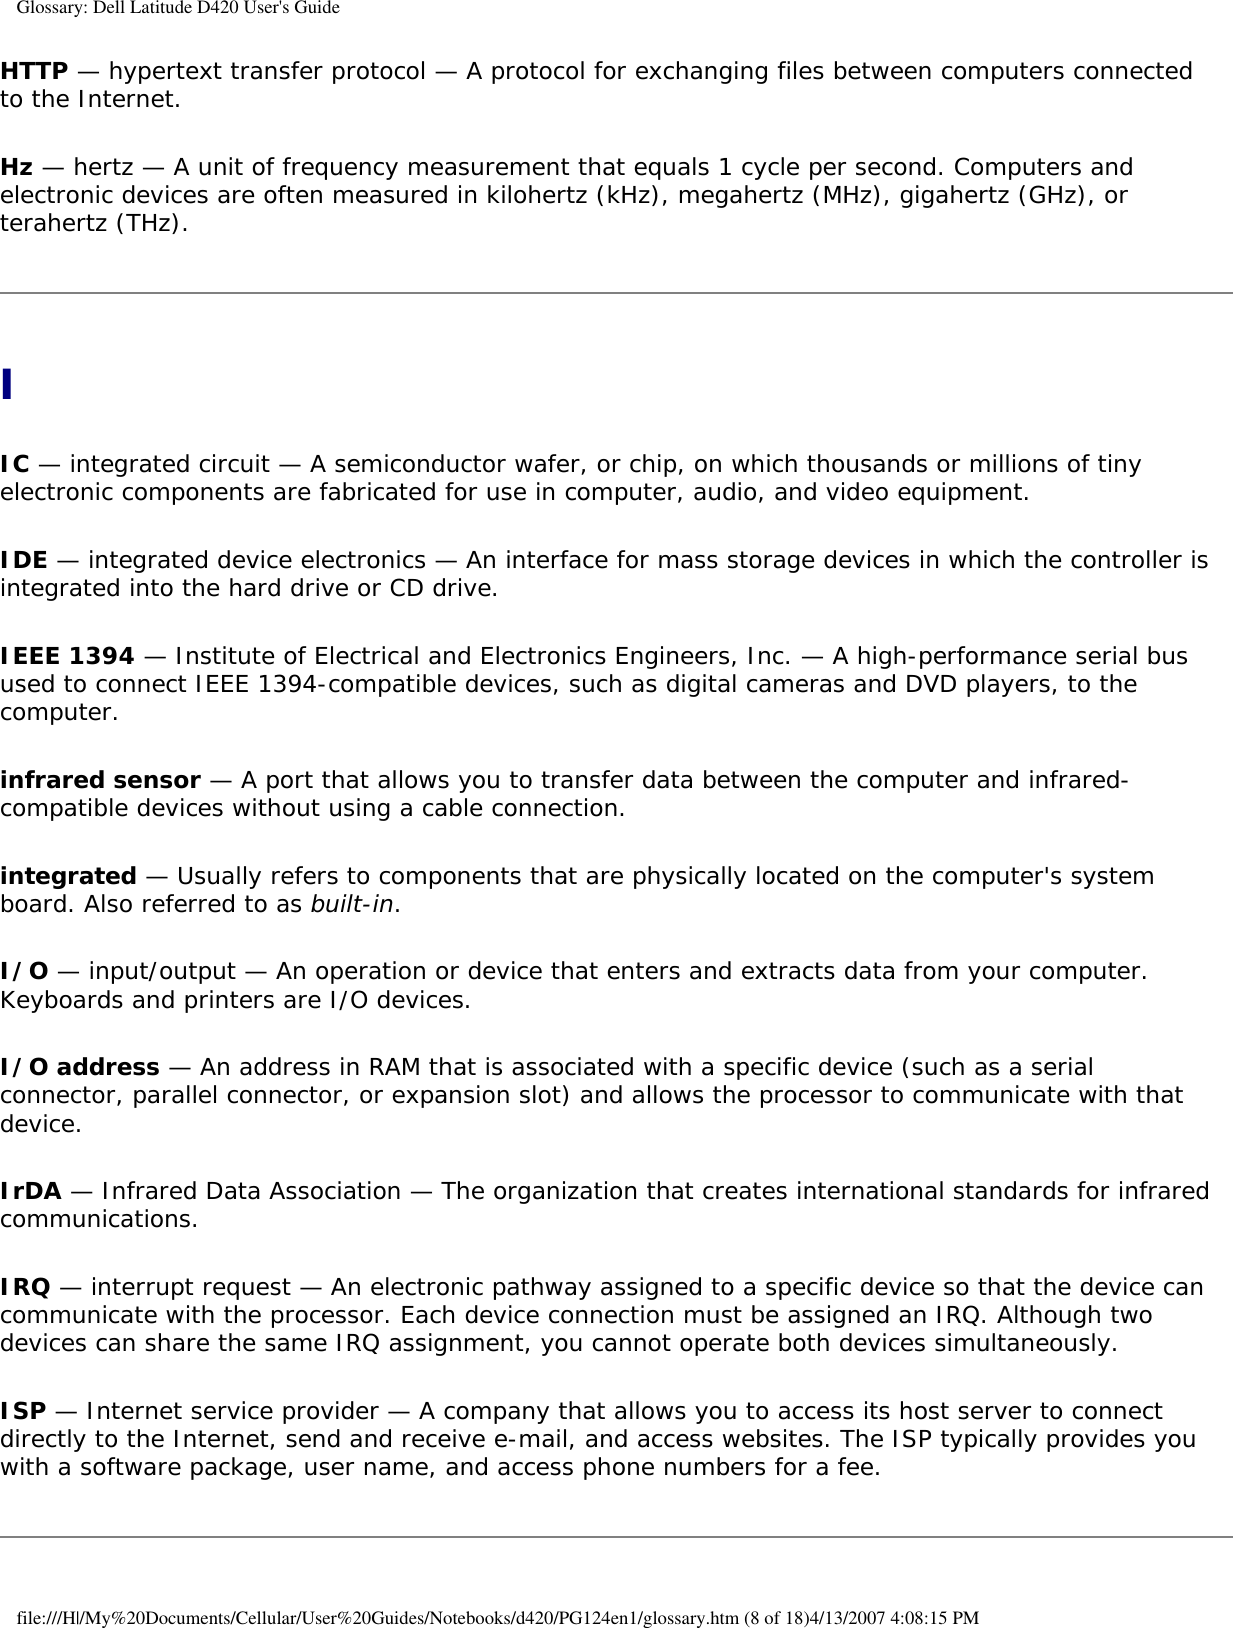 Glossary: Dell Latitude D420 User&apos;s GuideHTTP — hypertext transfer protocol — A protocol for exchanging files between computers connected to the Internet. Hz — hertz — A unit of frequency measurement that equals 1 cycle per second. Computers and electronic devices are often measured in kilohertz (kHz), megahertz (MHz), gigahertz (GHz), or terahertz (THz).IIC — integrated circuit — A semiconductor wafer, or chip, on which thousands or millions of tiny electronic components are fabricated for use in computer, audio, and video equipment. IDE — integrated device electronics — An interface for mass storage devices in which the controller is integrated into the hard drive or CD drive.IEEE 1394 — Institute of Electrical and Electronics Engineers, Inc. — A high-performance serial bus used to connect IEEE 1394-compatible devices, such as digital cameras and DVD players, to the computer. infrared sensor — A port that allows you to transfer data between the computer and infrared-compatible devices without using a cable connection.integrated — Usually refers to components that are physically located on the computer&apos;s system board. Also referred to as built-in.I/O — input/output — An operation or device that enters and extracts data from your computer. Keyboards and printers are I/O devices. I/O address — An address in RAM that is associated with a specific device (such as a serial connector, parallel connector, or expansion slot) and allows the processor to communicate with that device.IrDA — Infrared Data Association — The organization that creates international standards for infrared communications.IRQ — interrupt request — An electronic pathway assigned to a specific device so that the device can communicate with the processor. Each device connection must be assigned an IRQ. Although two devices can share the same IRQ assignment, you cannot operate both devices simultaneously.ISP — Internet service provider — A company that allows you to access its host server to connect directly to the Internet, send and receive e-mail, and access websites. The ISP typically provides you with a software package, user name, and access phone numbers for a fee. file:///H|/My%20Documents/Cellular/User%20Guides/Notebooks/d420/PG124en1/glossary.htm (8 of 18)4/13/2007 4:08:15 PM